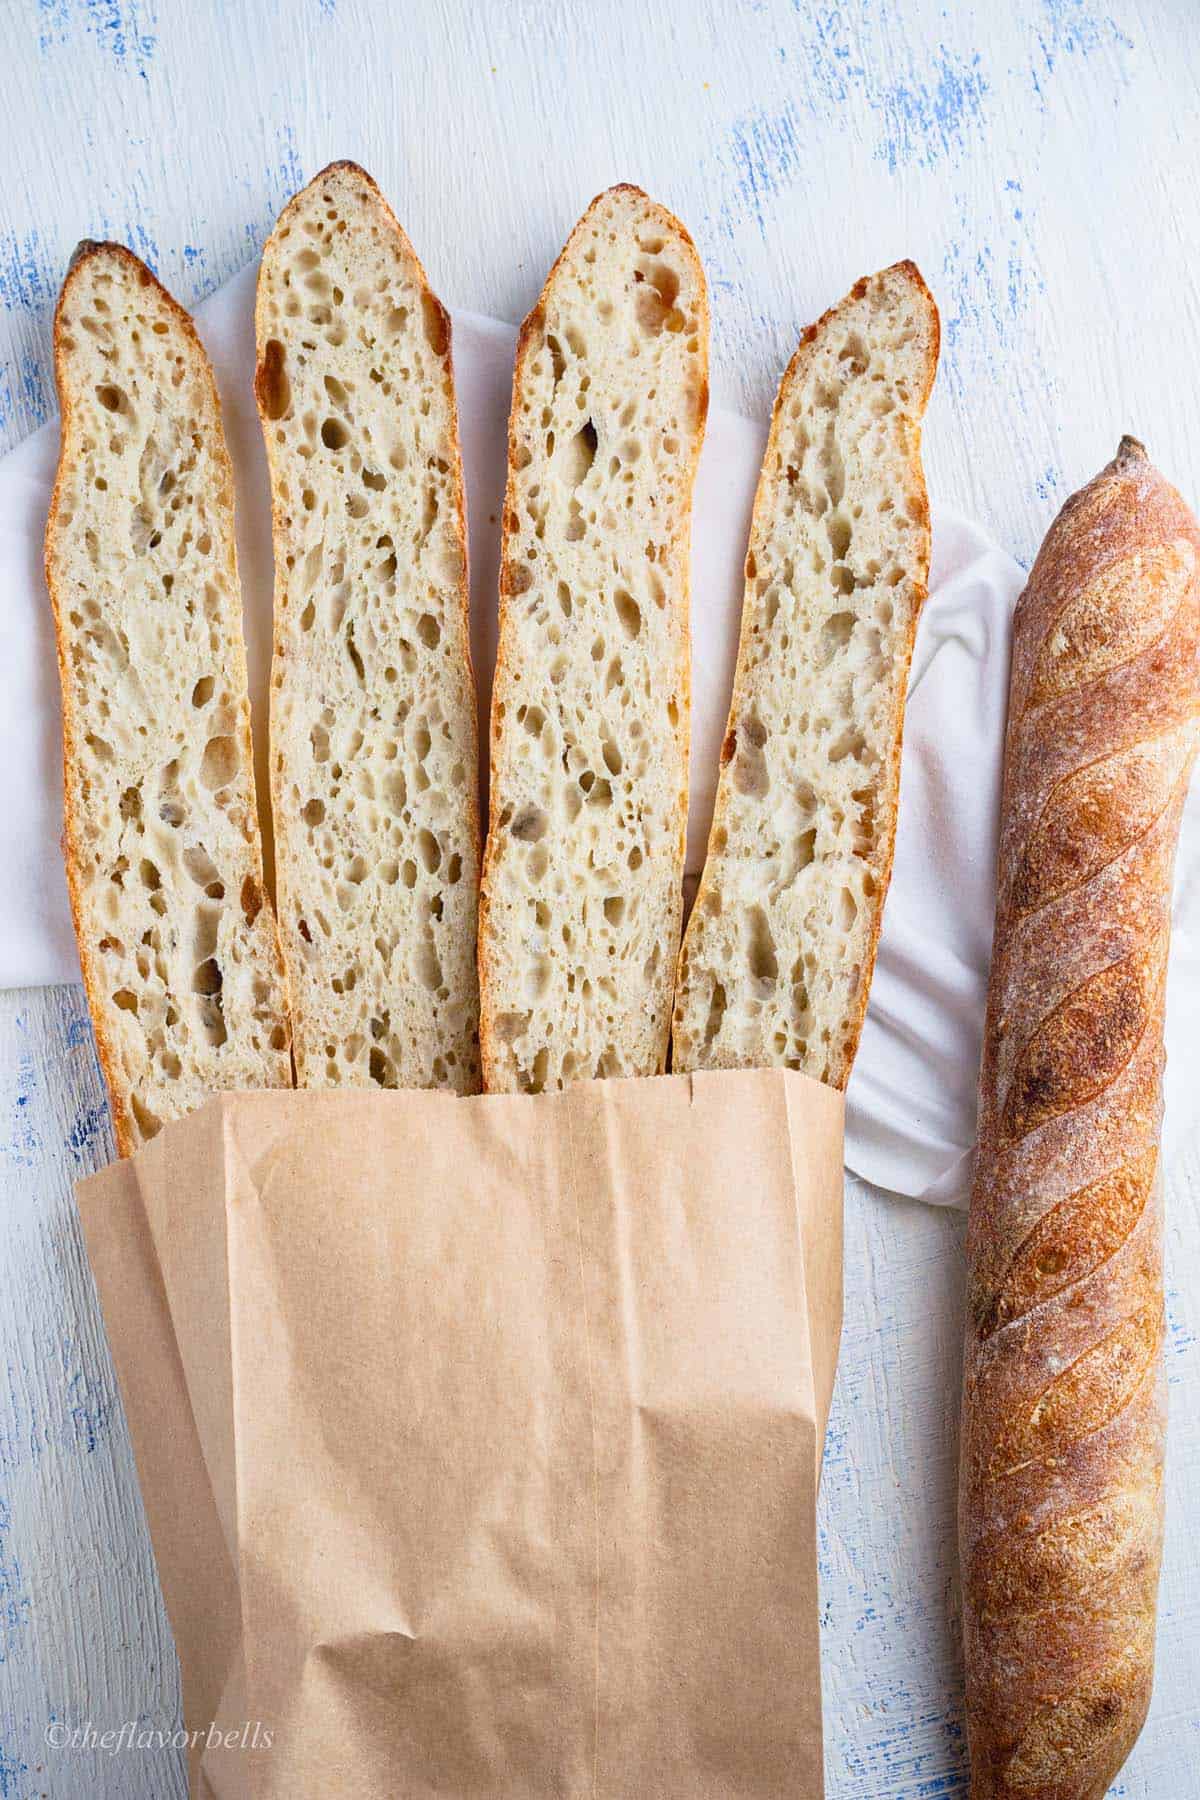 two baguettes sliced from the center to showcase the open crumb structure